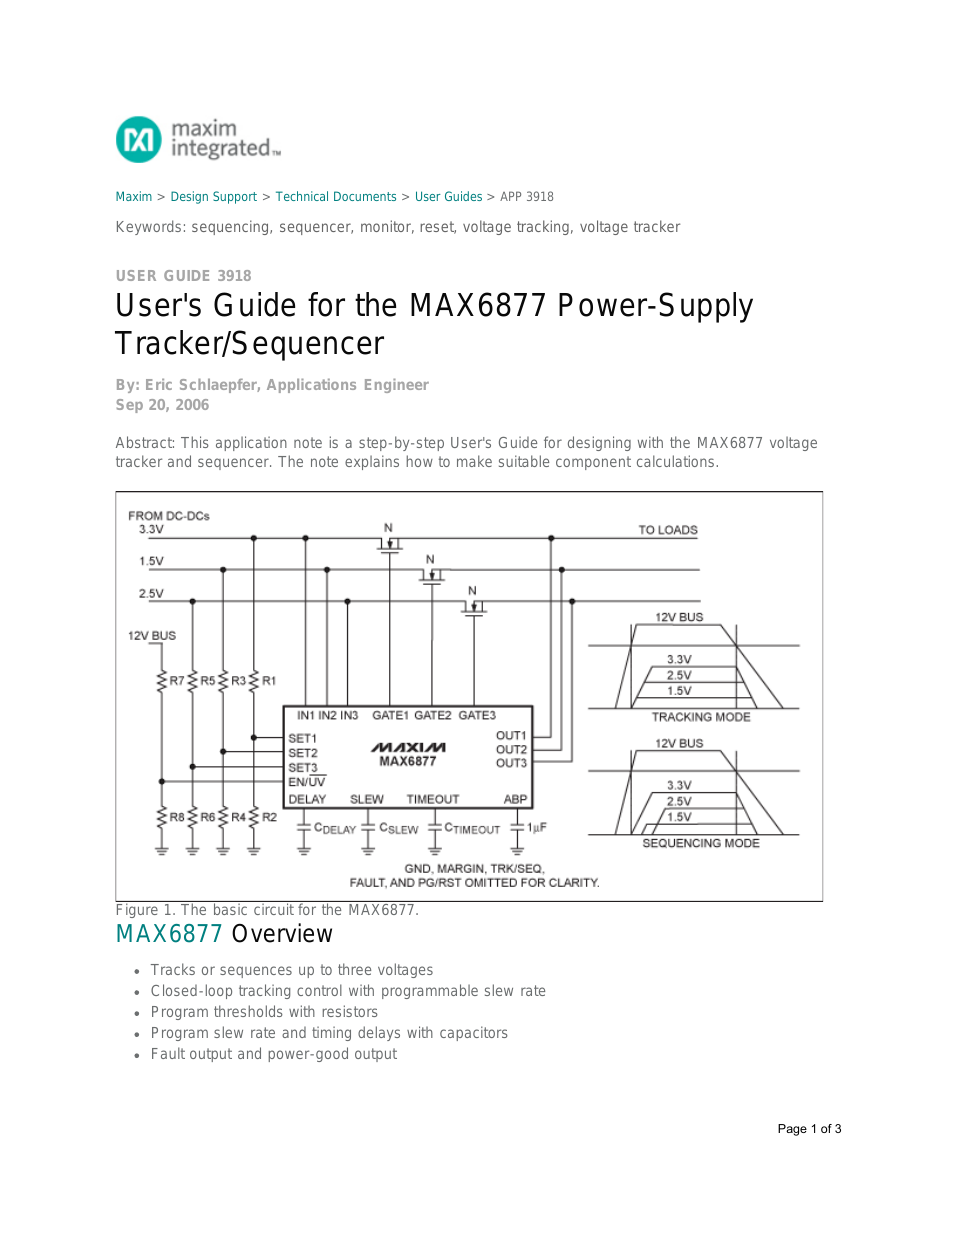 MAX6877 Power-Supply Tracker/Sequencer